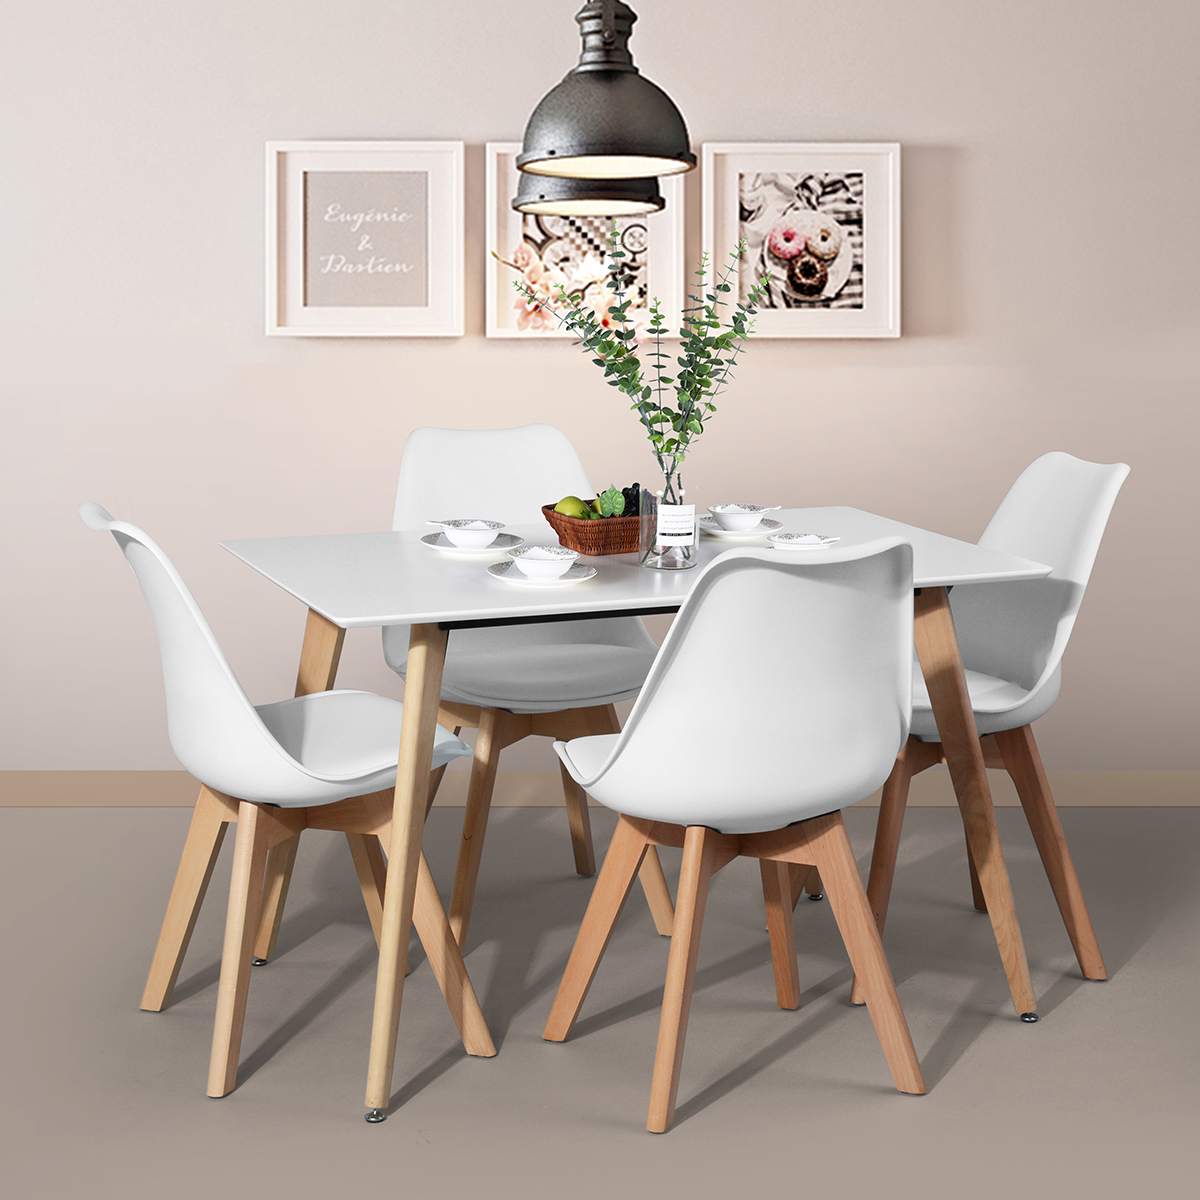 43.3" Square High Glossy Dinning Table - White & Oak